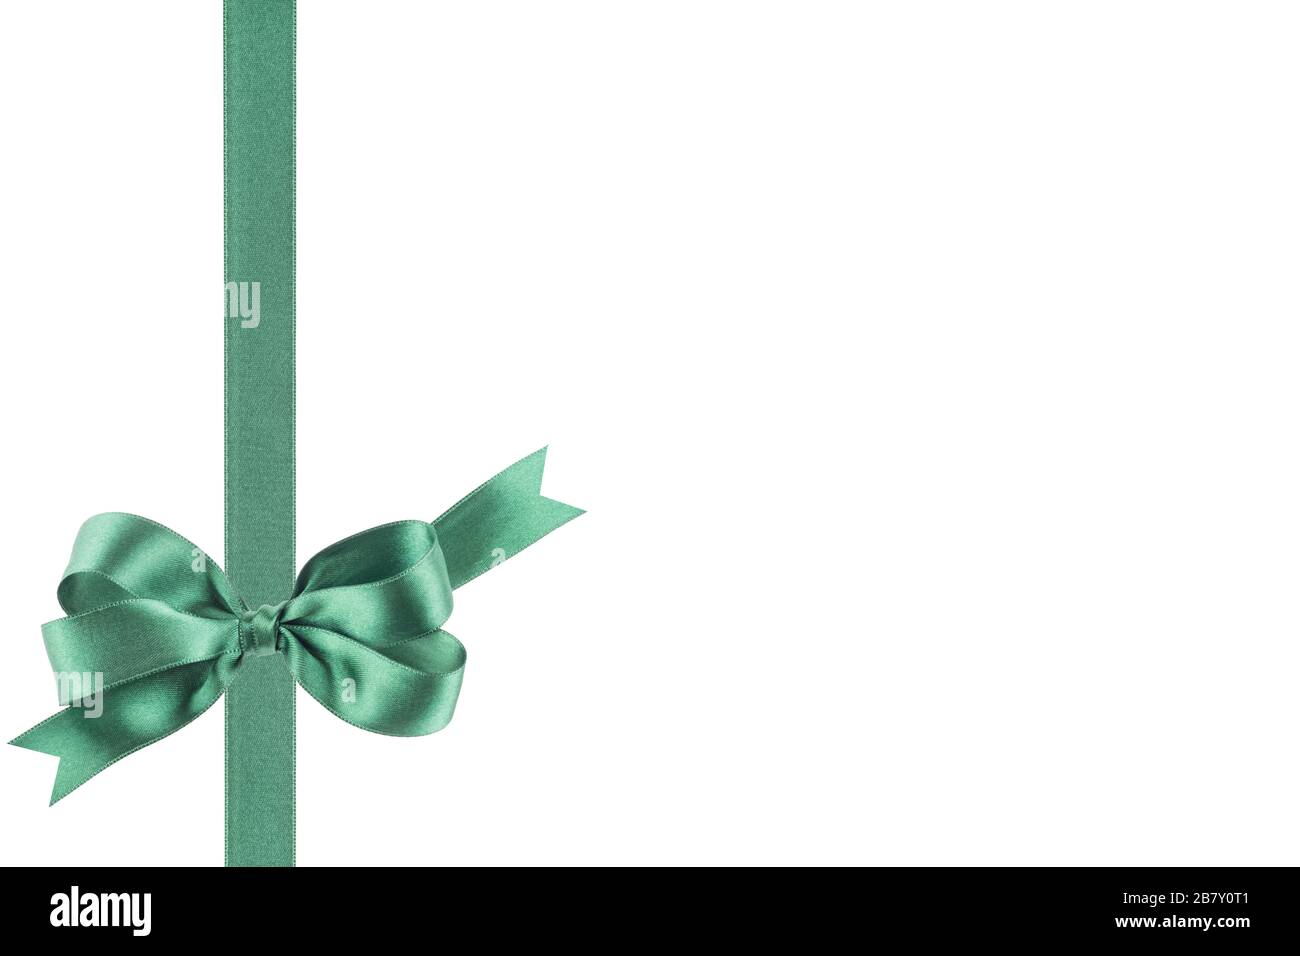 Curly, glittery green ribbon for gift wrapping on a white